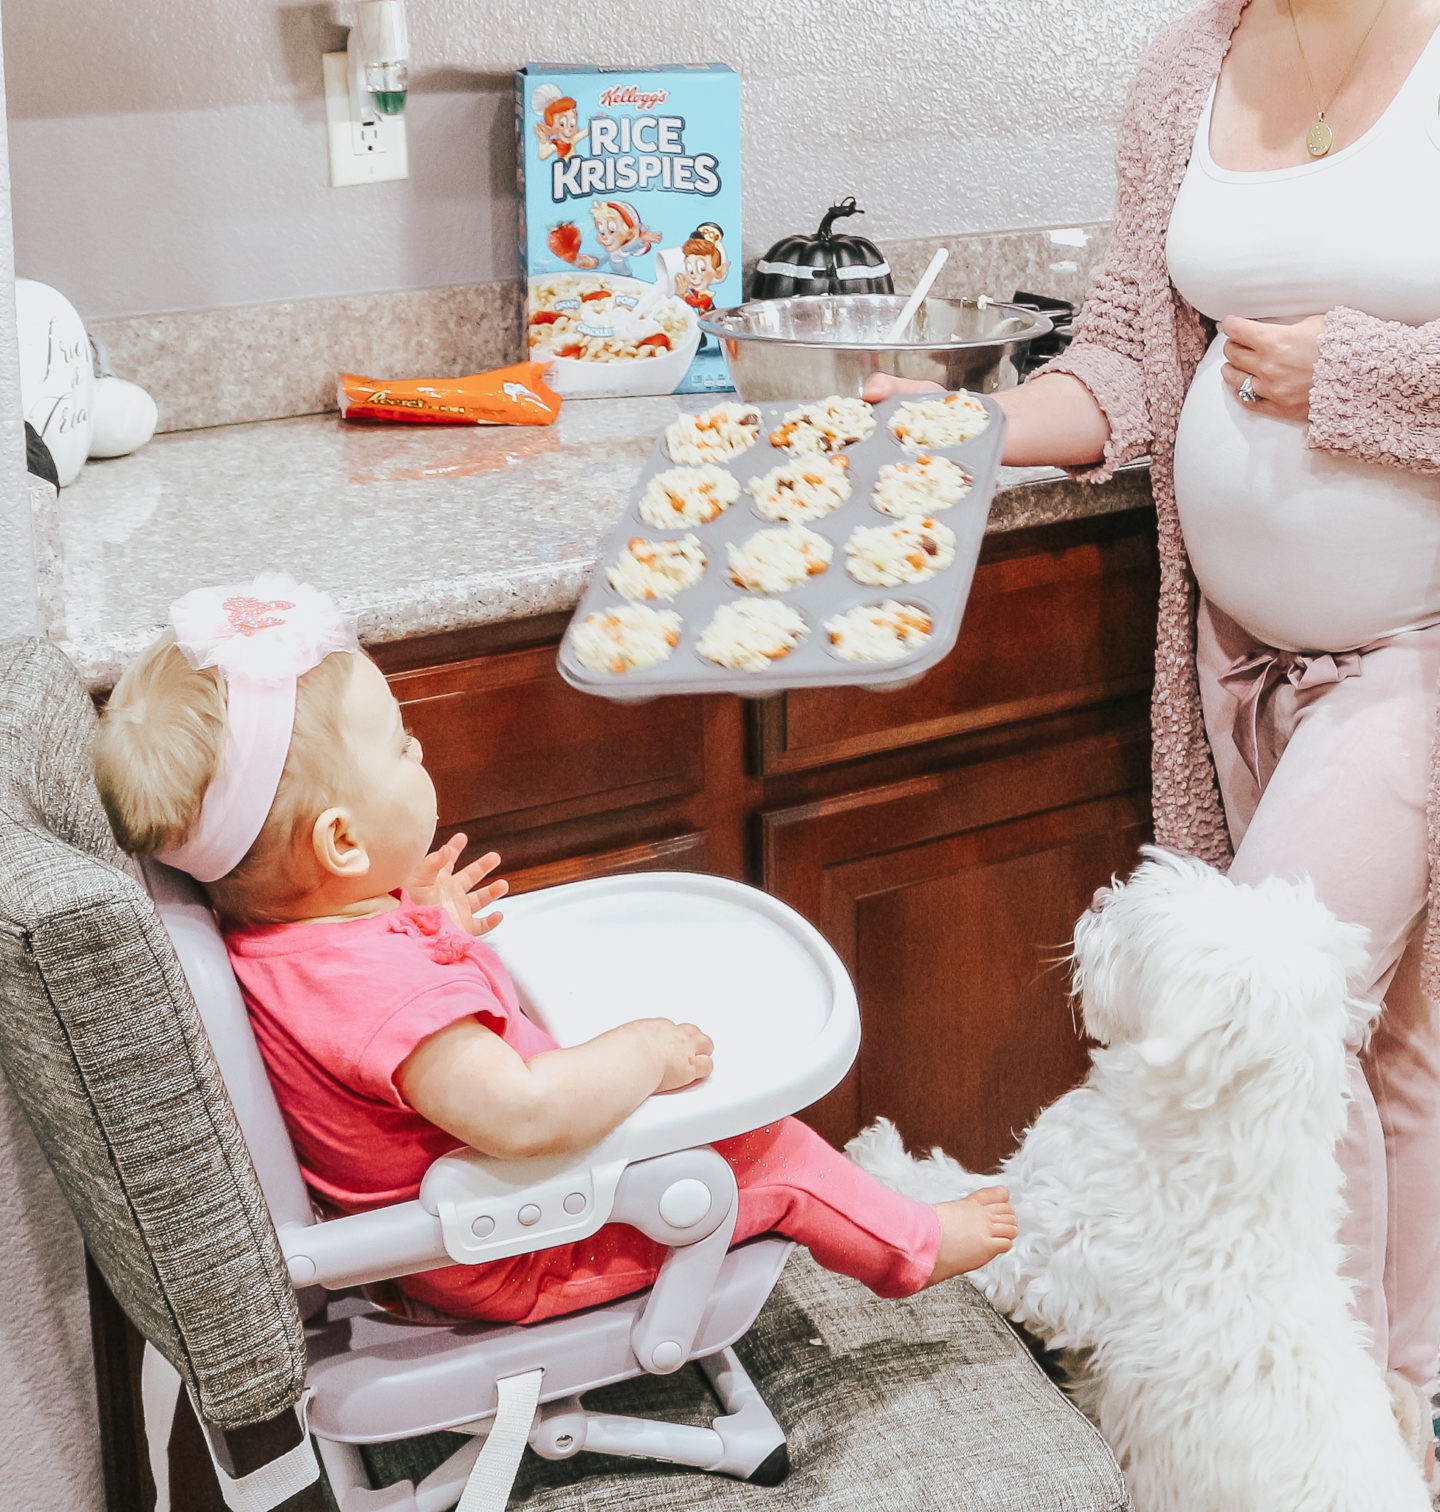 Mom's Meals: How to Have Fun in the Kitchen with a Baby